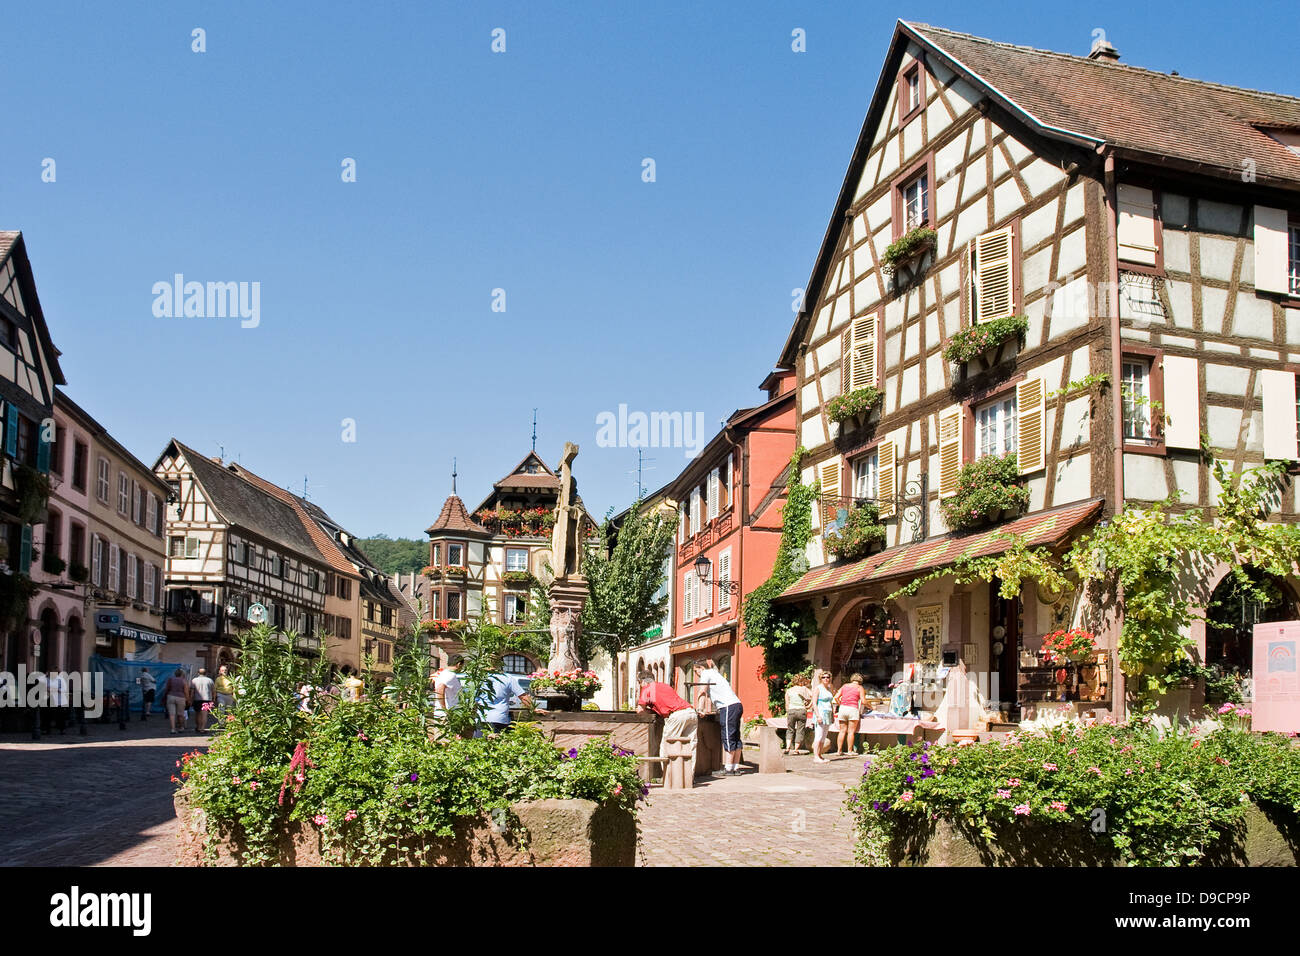 Half-timbered houses in the Old Town of Kaysersberg, Half-timbered houses in the old town of Kaysersberg, Stock Photo